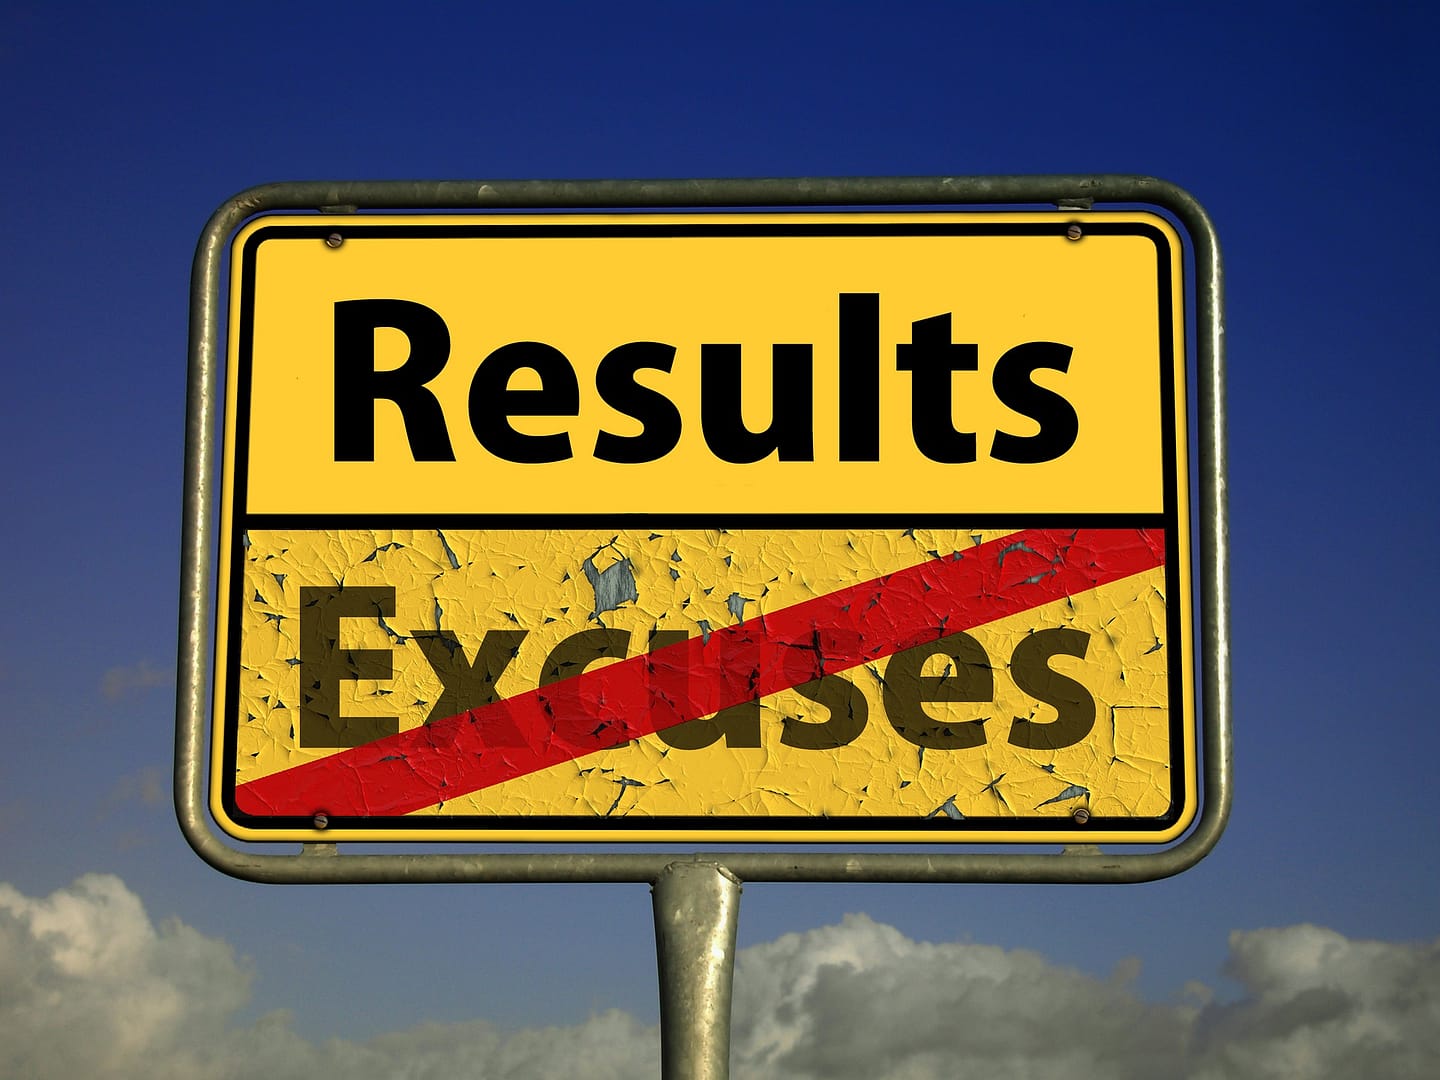 Results not excuses sign